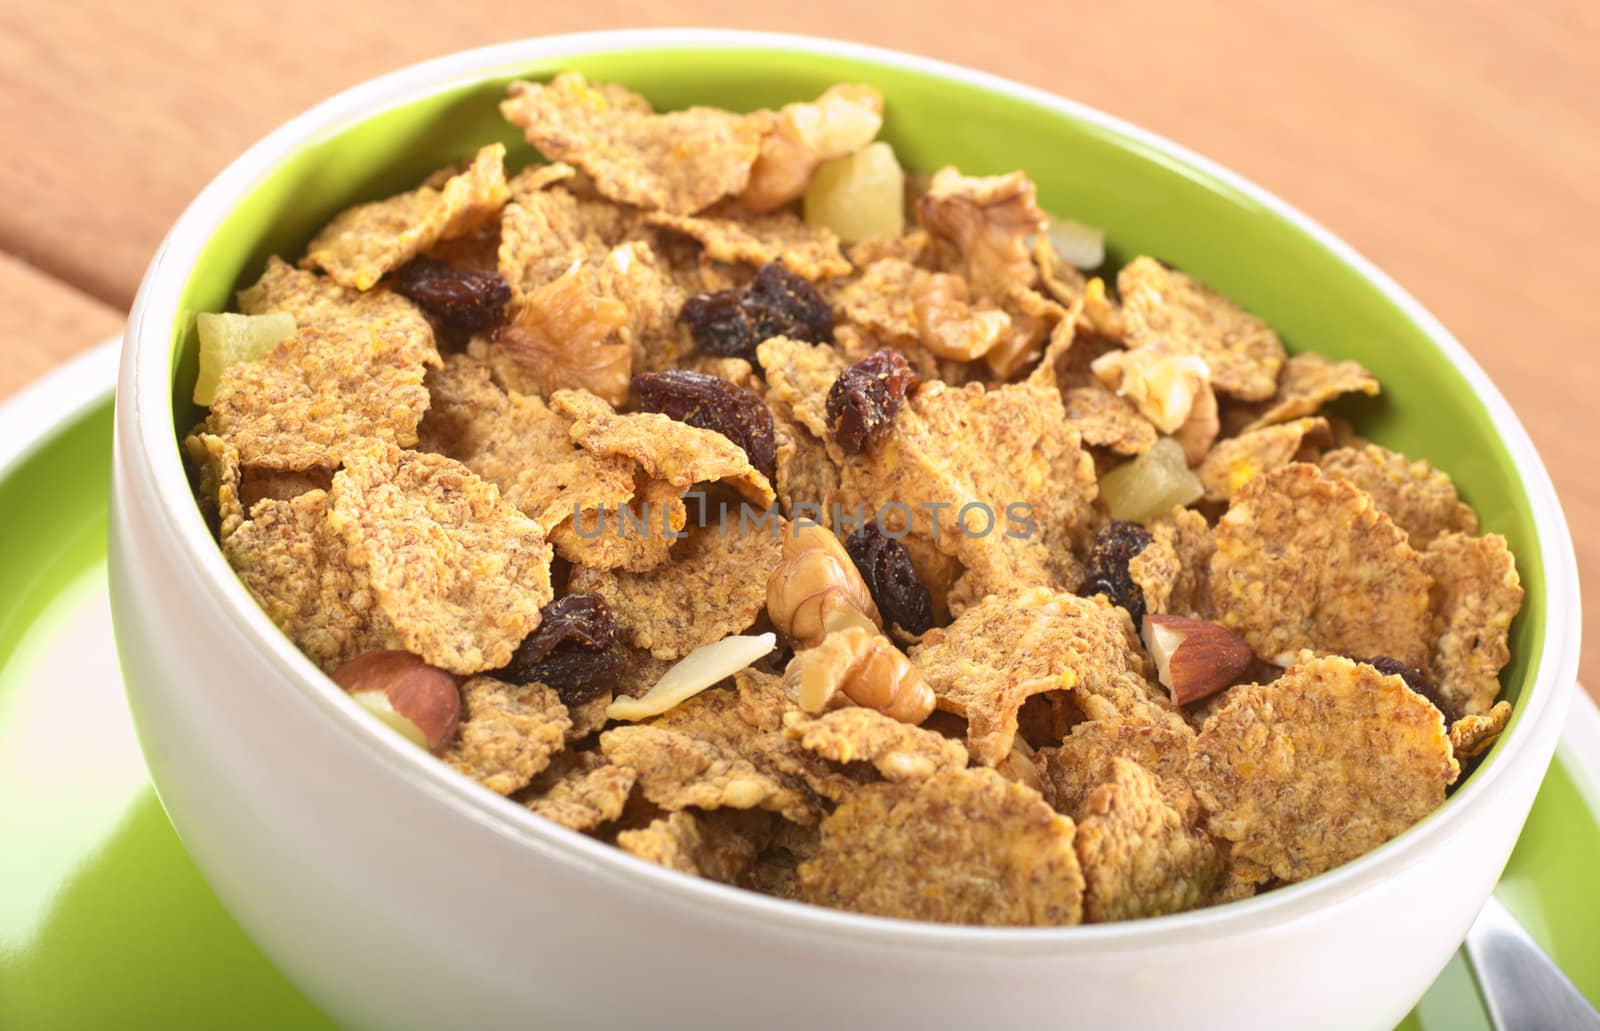 Wholewheat cereal with dried fruit, raisin, walnut and almond in bowl (Selective Focus, Focus in the middle of the bowl) 